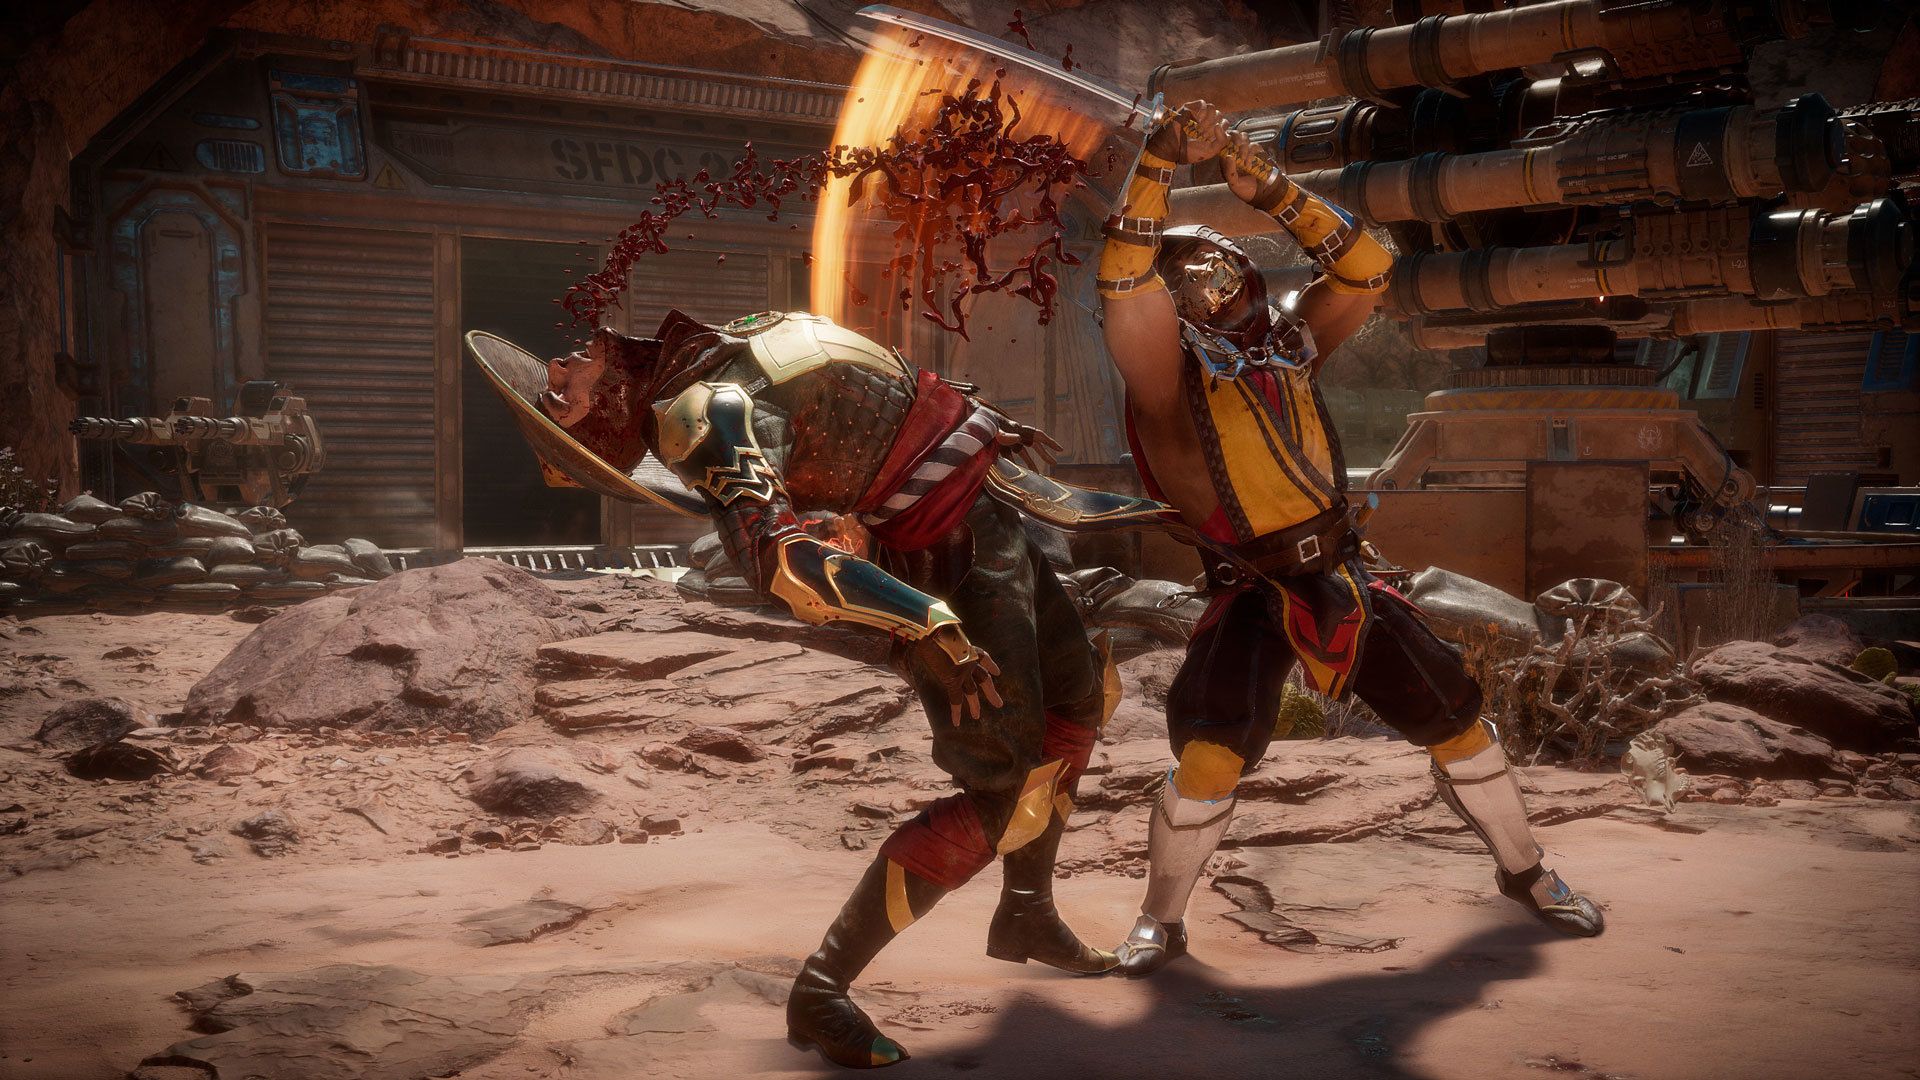 Mortal Kombat 11 Is Still On Sale For $10 Off At Multiple Retailers (PS Xbox One, Switch)